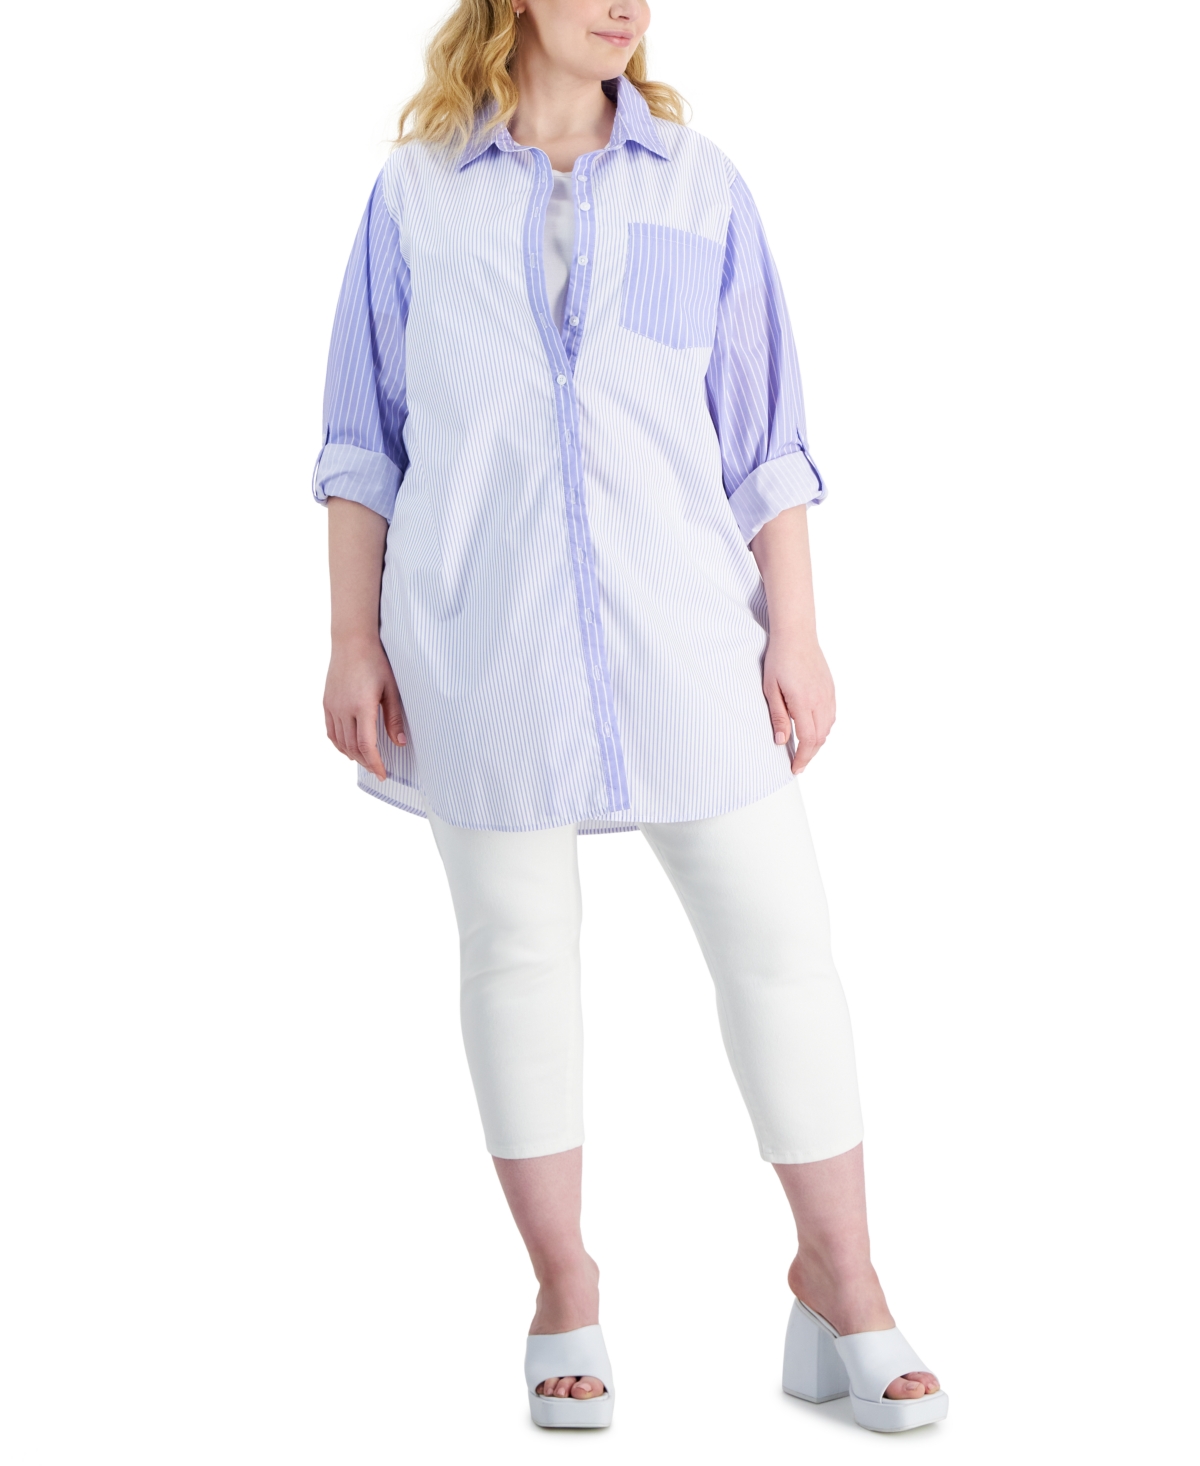 Full Circle Trends Trendy Plus Size Colorblocked Shirtdress In Blue Heron